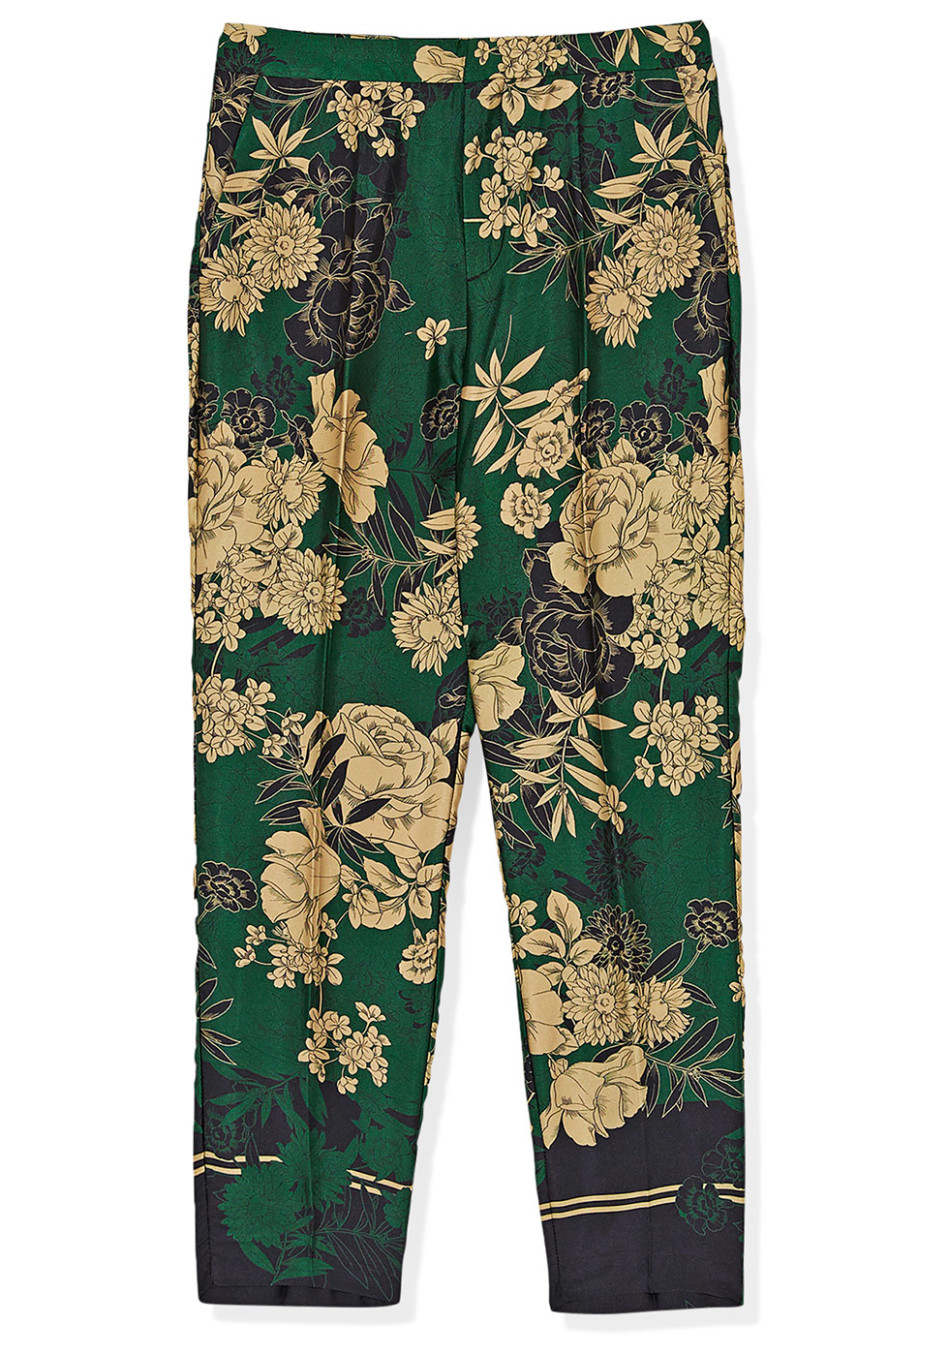 Affordable Fashion January 2018 - Embroidered Flower Pattern Pants